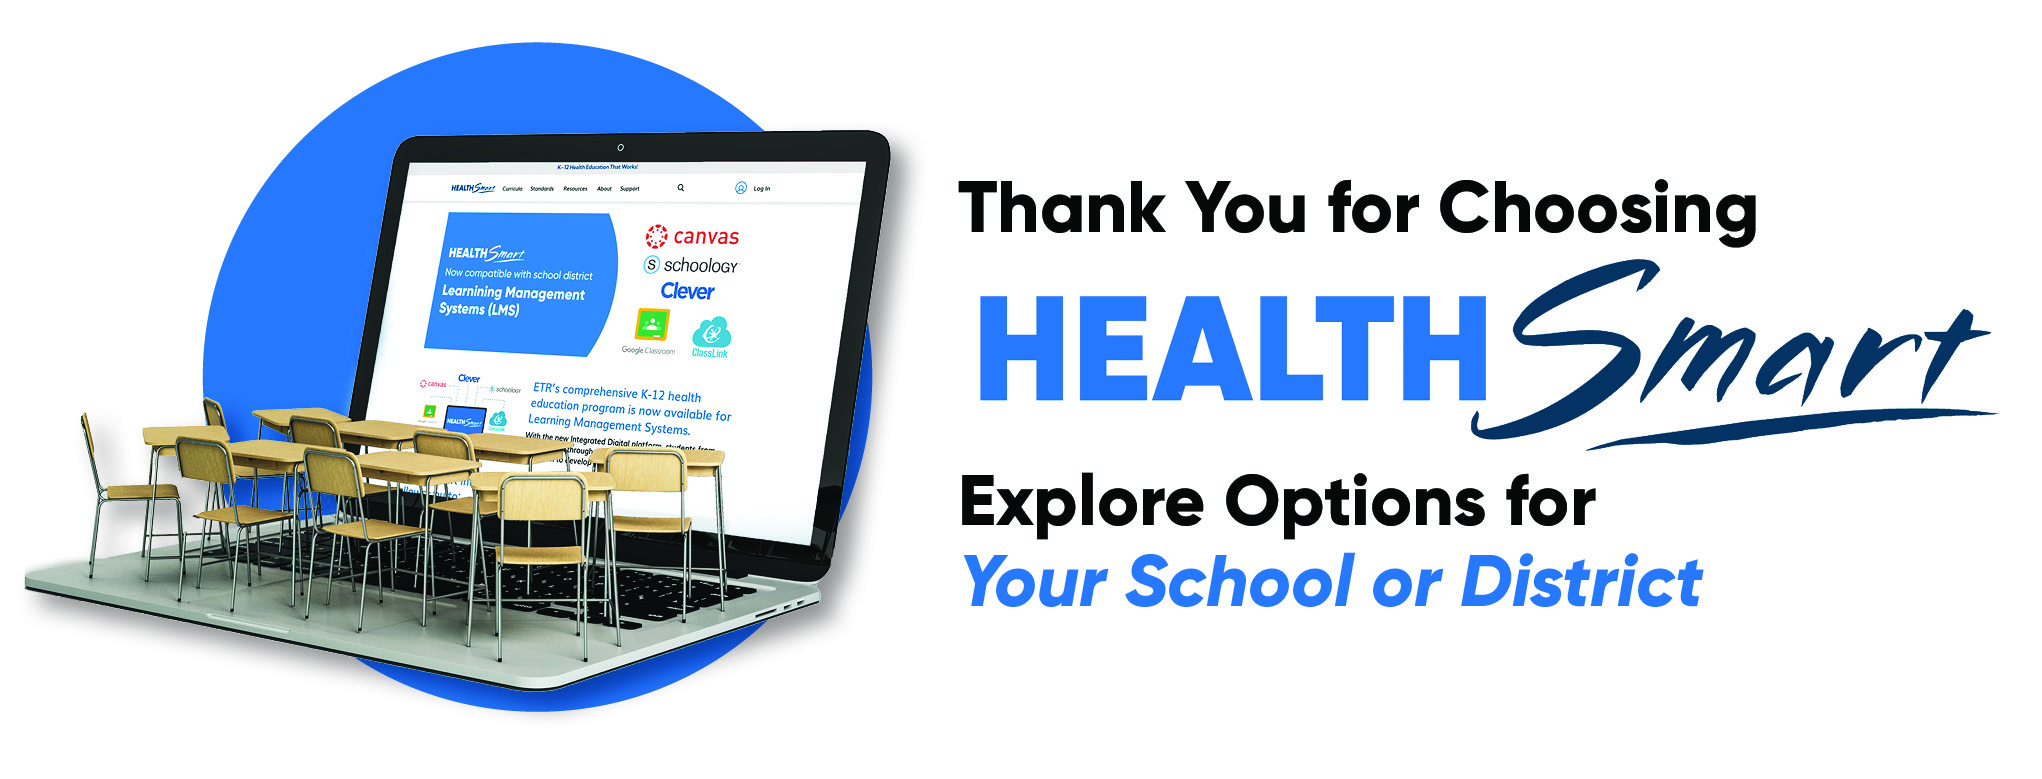 Thank You for Choosing HealthSmart! Explore Options for Your School or District 